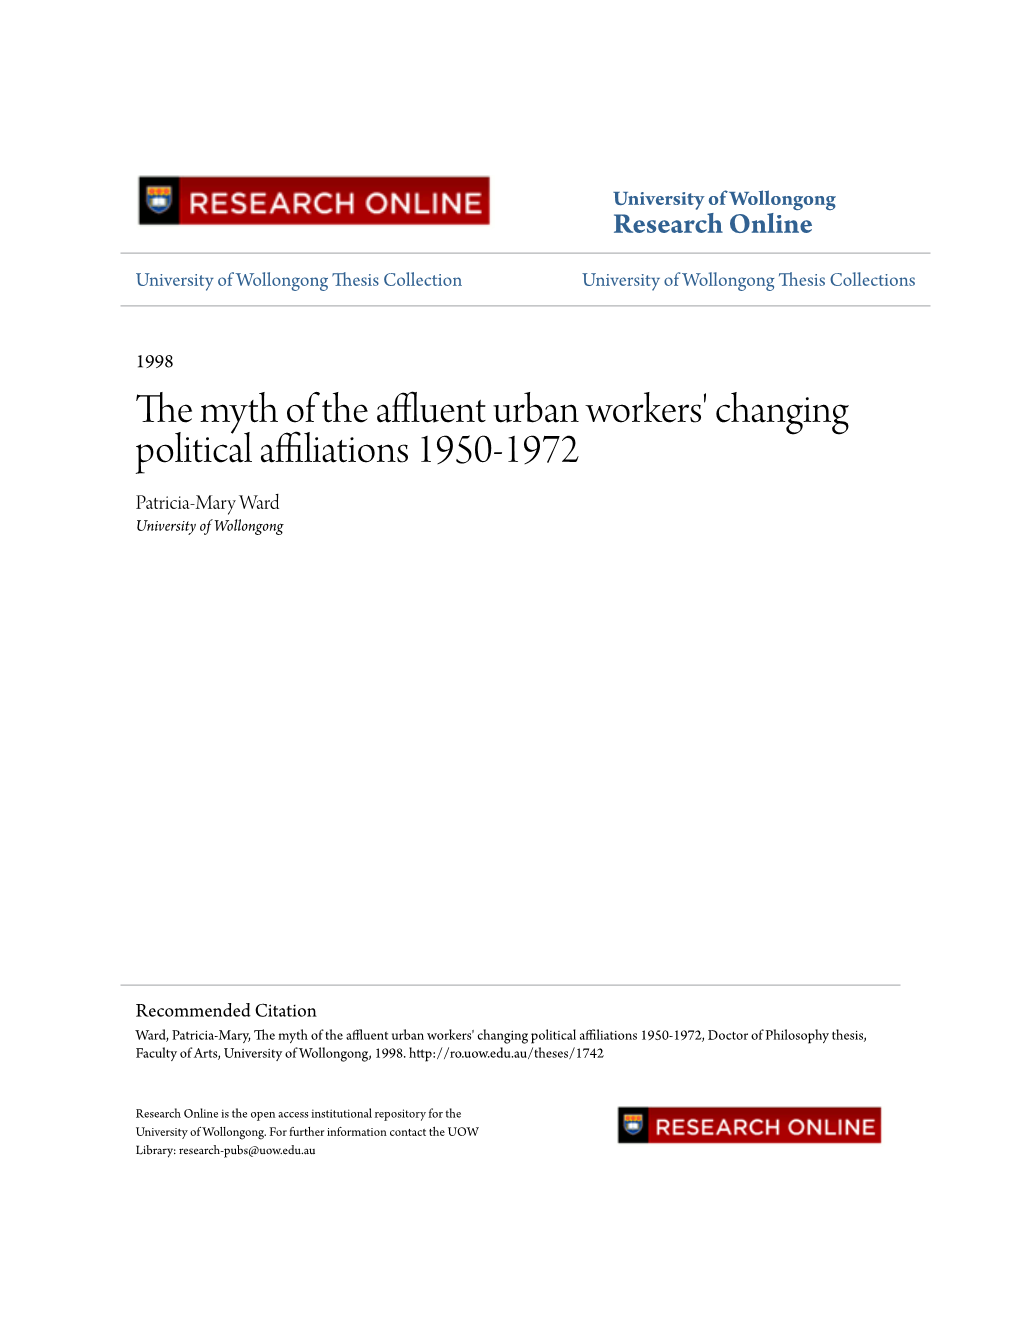 The Myth of the Affluent Urban Workers' Changing Political Affiliations 1950-1972